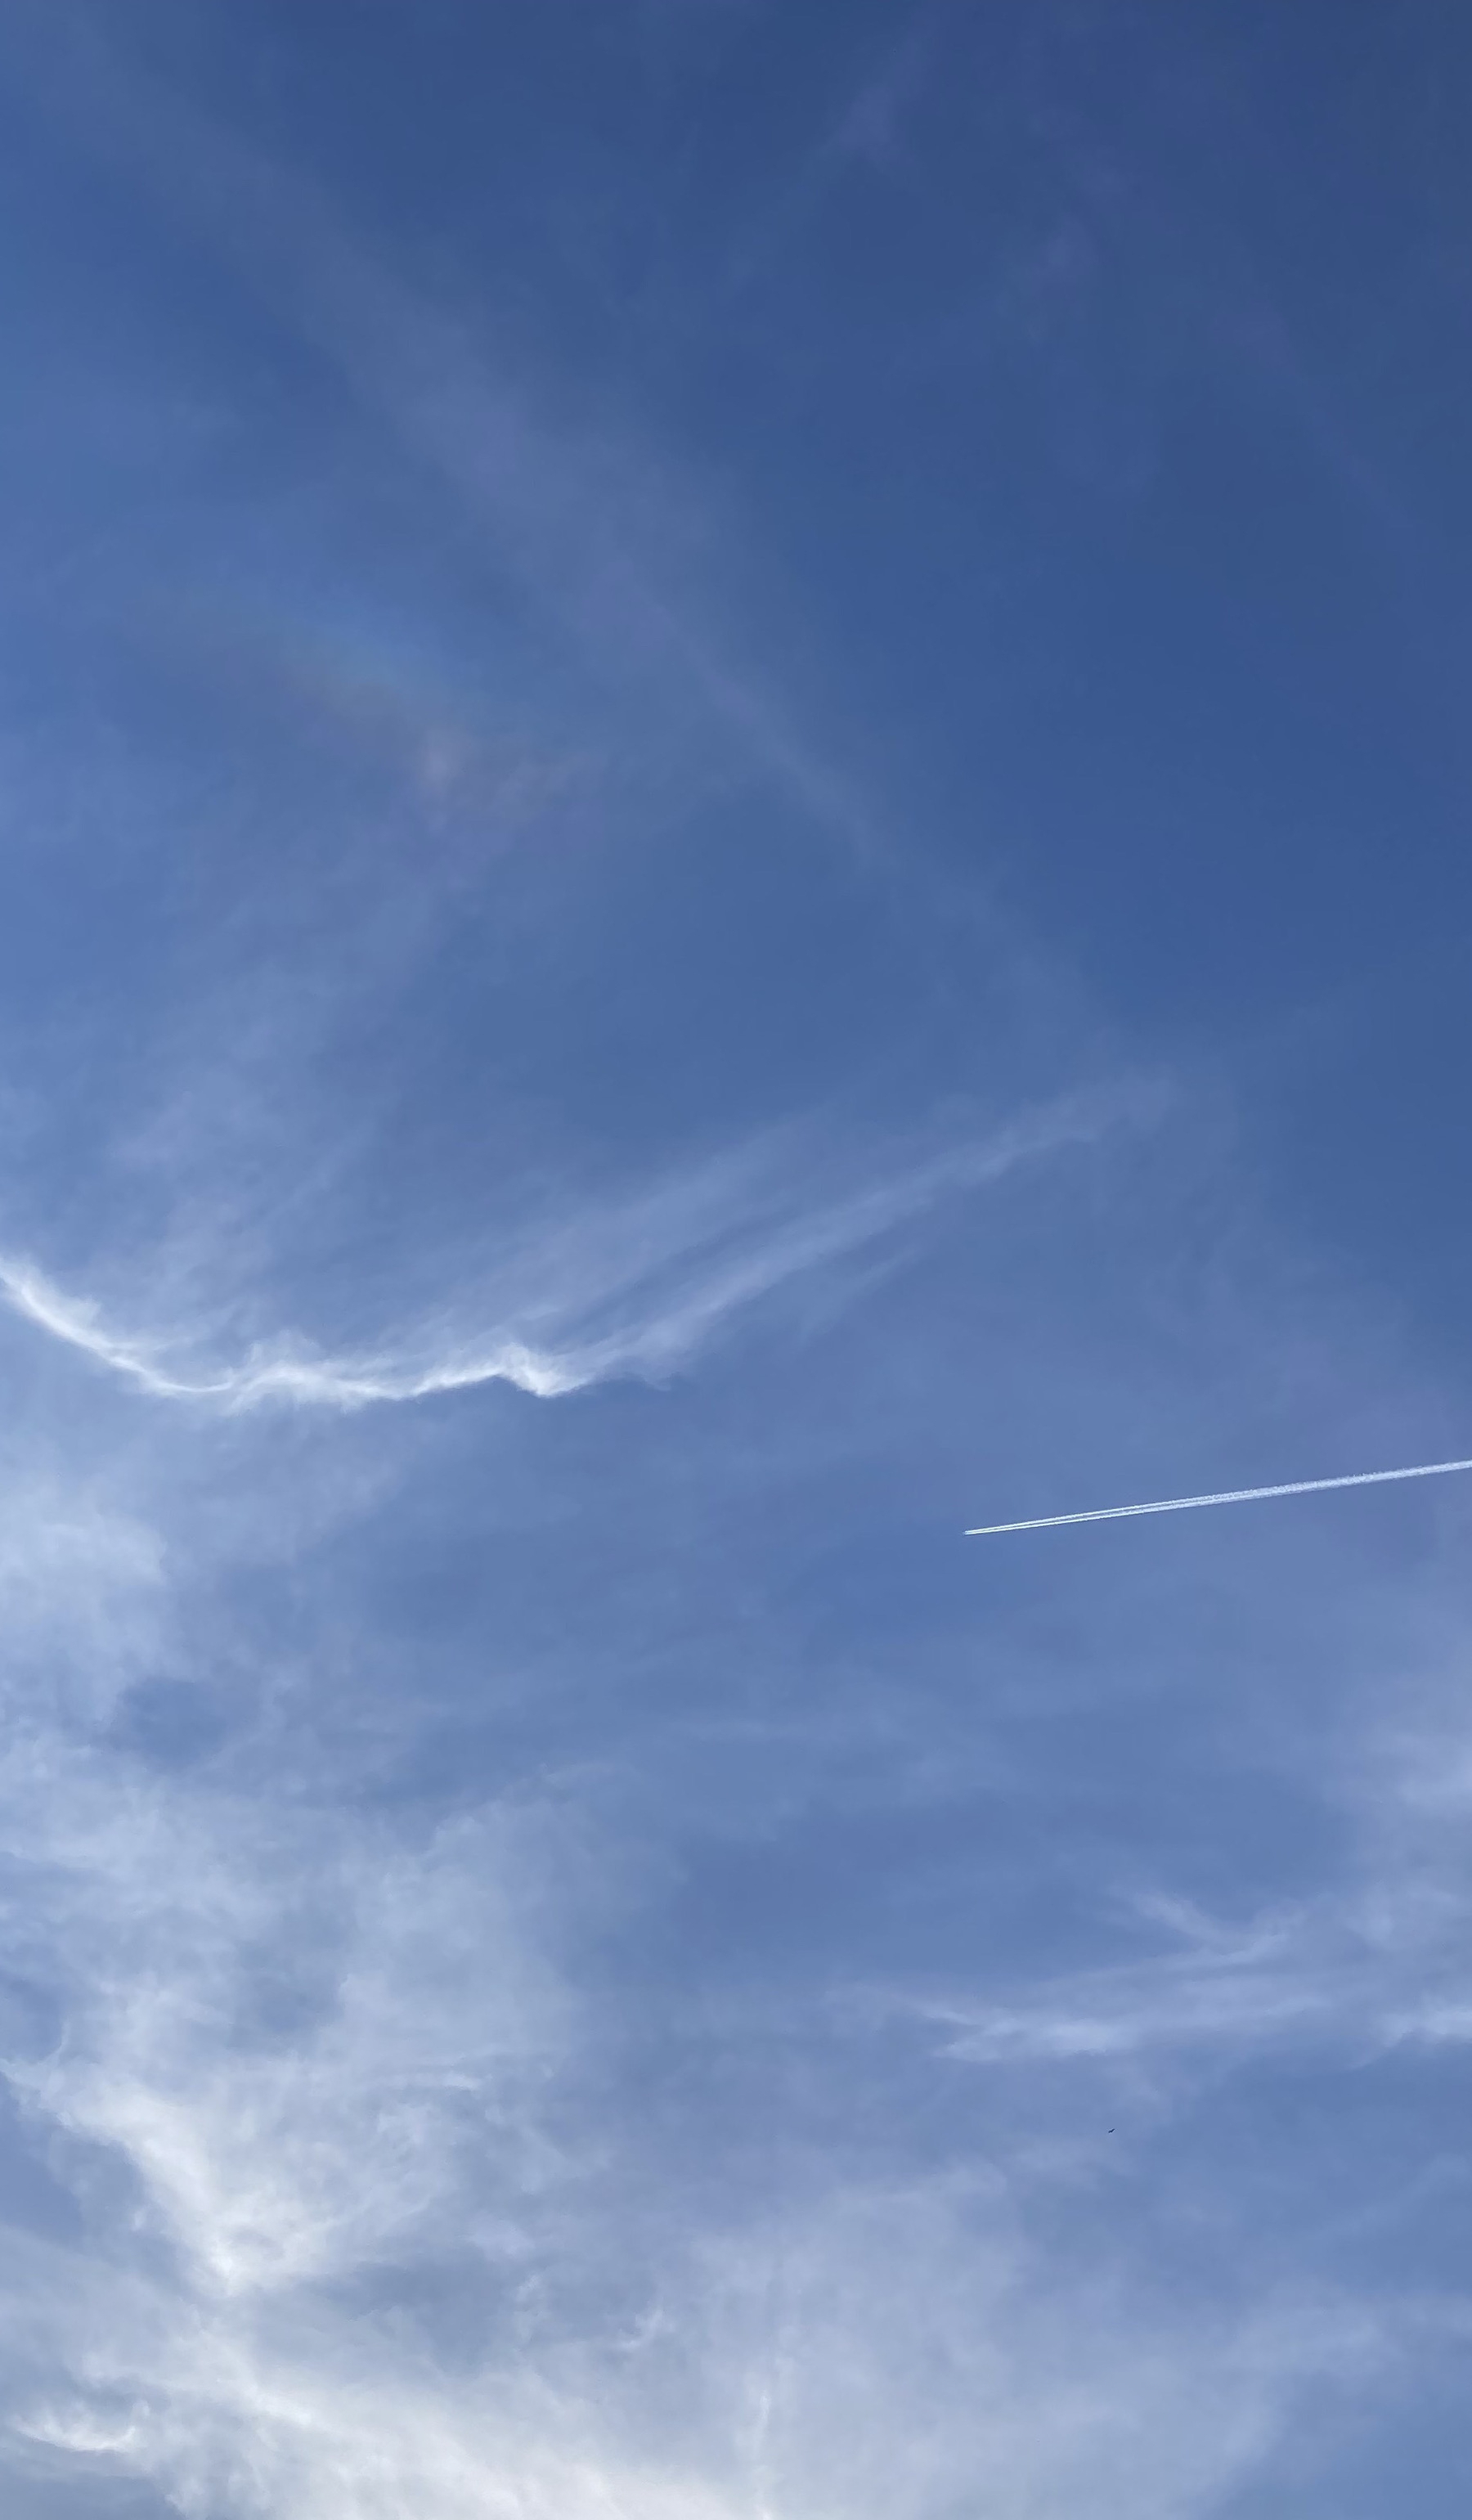 blue sky marbled with high cirrus clouds; the contrail of a transcontinental airplane passing left to right in the lower right; a faint sundog barely visible in the upper left